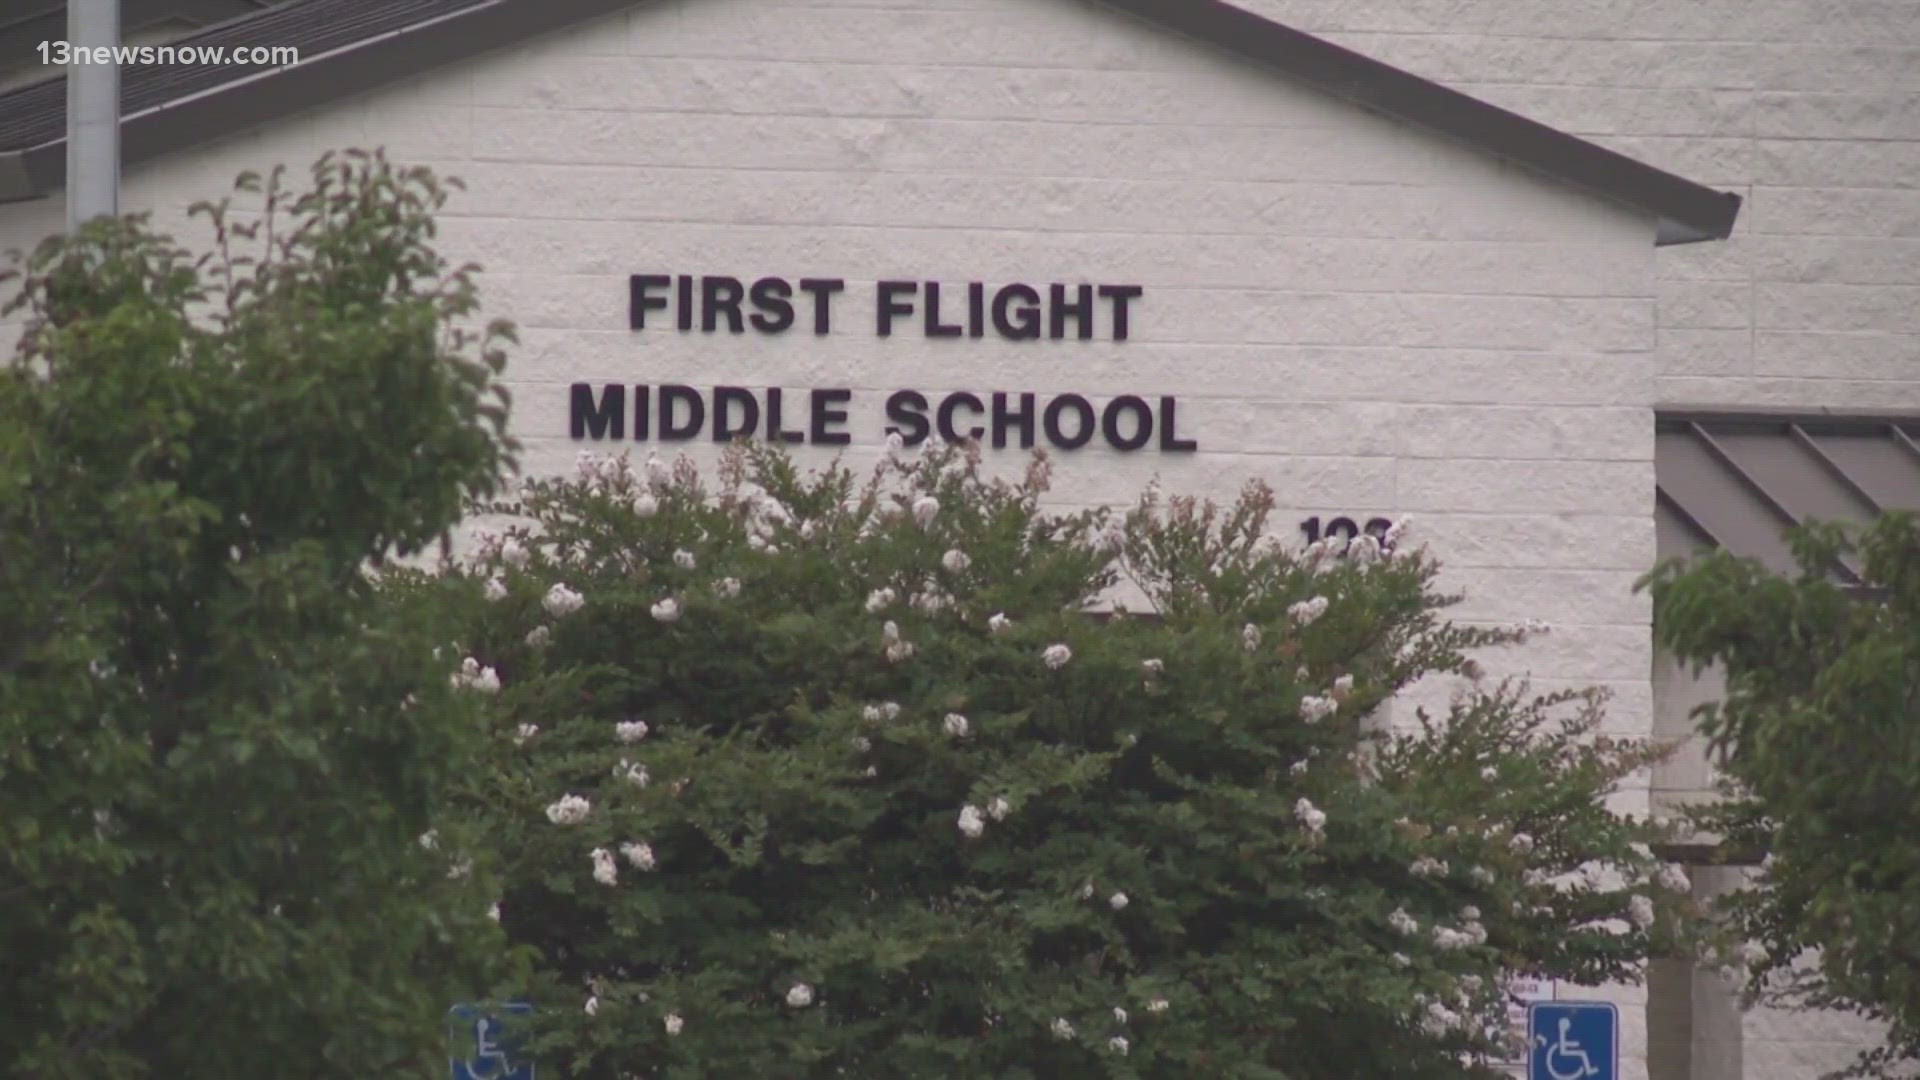 Dare County school officials called an emergency meeting to deal with mold issues custodians found in First Flight Elementary and Middle Schools.